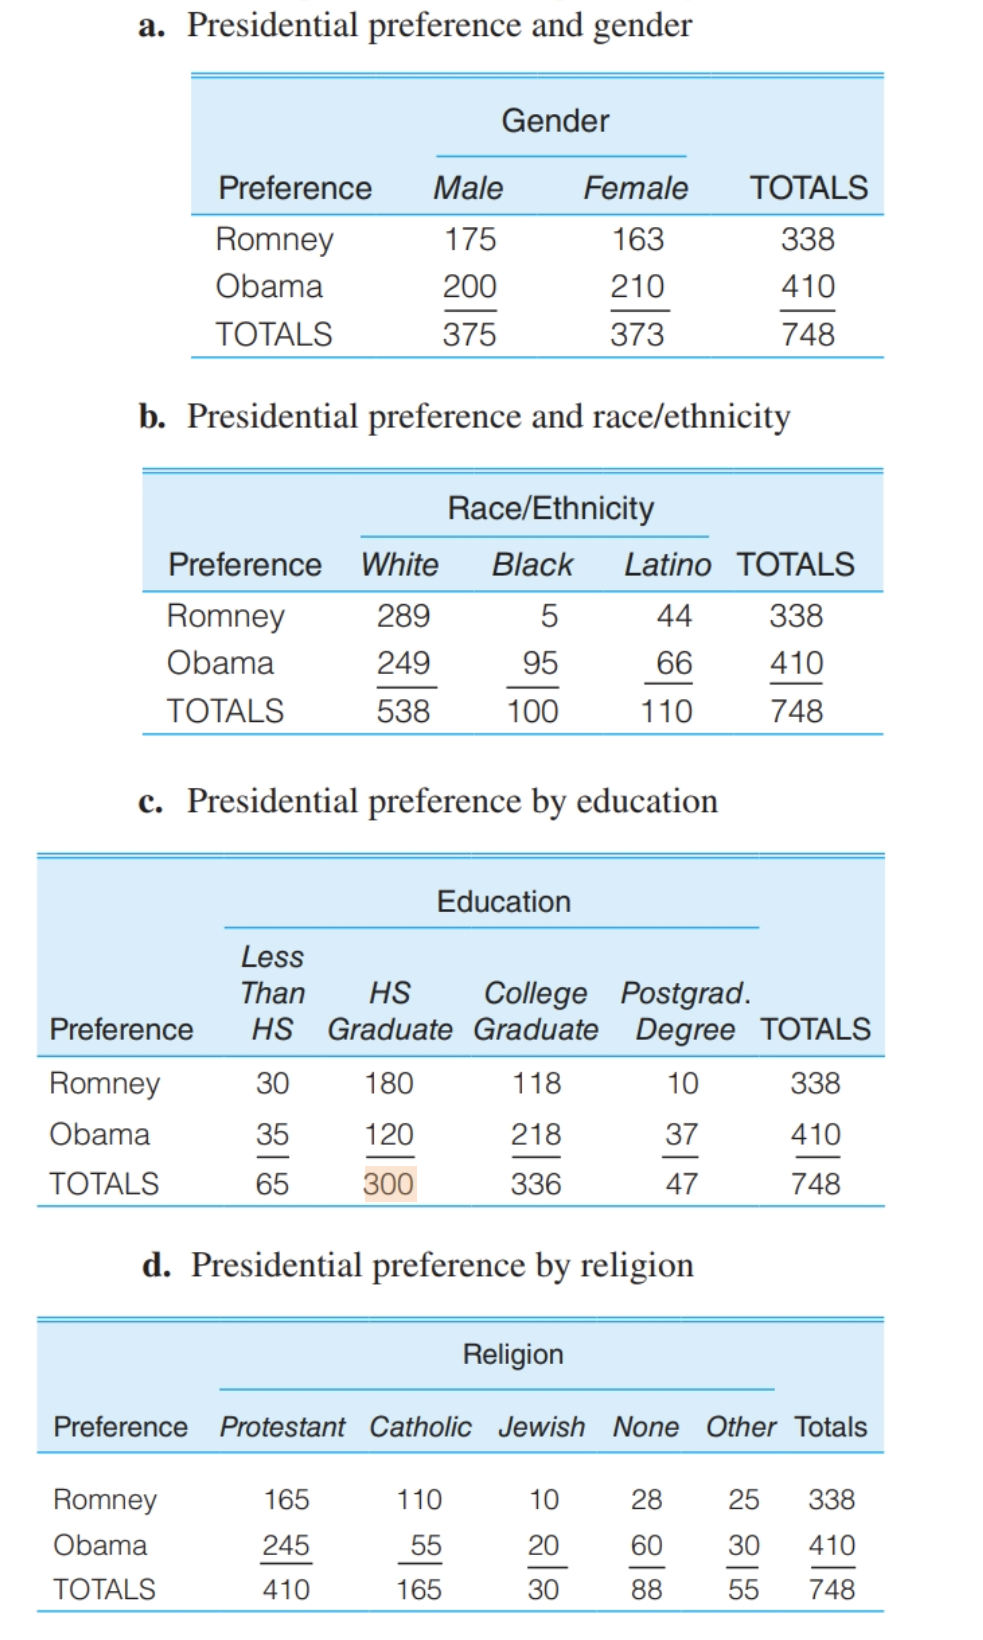 a. Presidential preference and gender
Gender
Preference
Male
Female
TOTALS
Romney
175
163
338
Obama
200
210
410
TOTALS
375
373
748
b. Presidential preference and race/ethnicity
Race/Ethnicity
Preference White
Black
Latino TOTALS
Romney
289
44
338
Obama
249
95
66
410
TOTALS
538
100
110
748
c. Presidential preference by education
Education
Less
Than
HS
College Postgrad.
HS Graduate Graduate Degree TOTALS
Preference
Romney
30
180
118
10
338
Obama
35
120
218
37
410
ТОTALS
65
300
336
47
748
d. Presidential preference by religion
Religion
Preference Protestant Catholic Jewish None Other Totals
Romney
165
110
10
28
25
338
Obama
245
55
20
60
30
410
TOTALS
410
165
30
88
55
748
